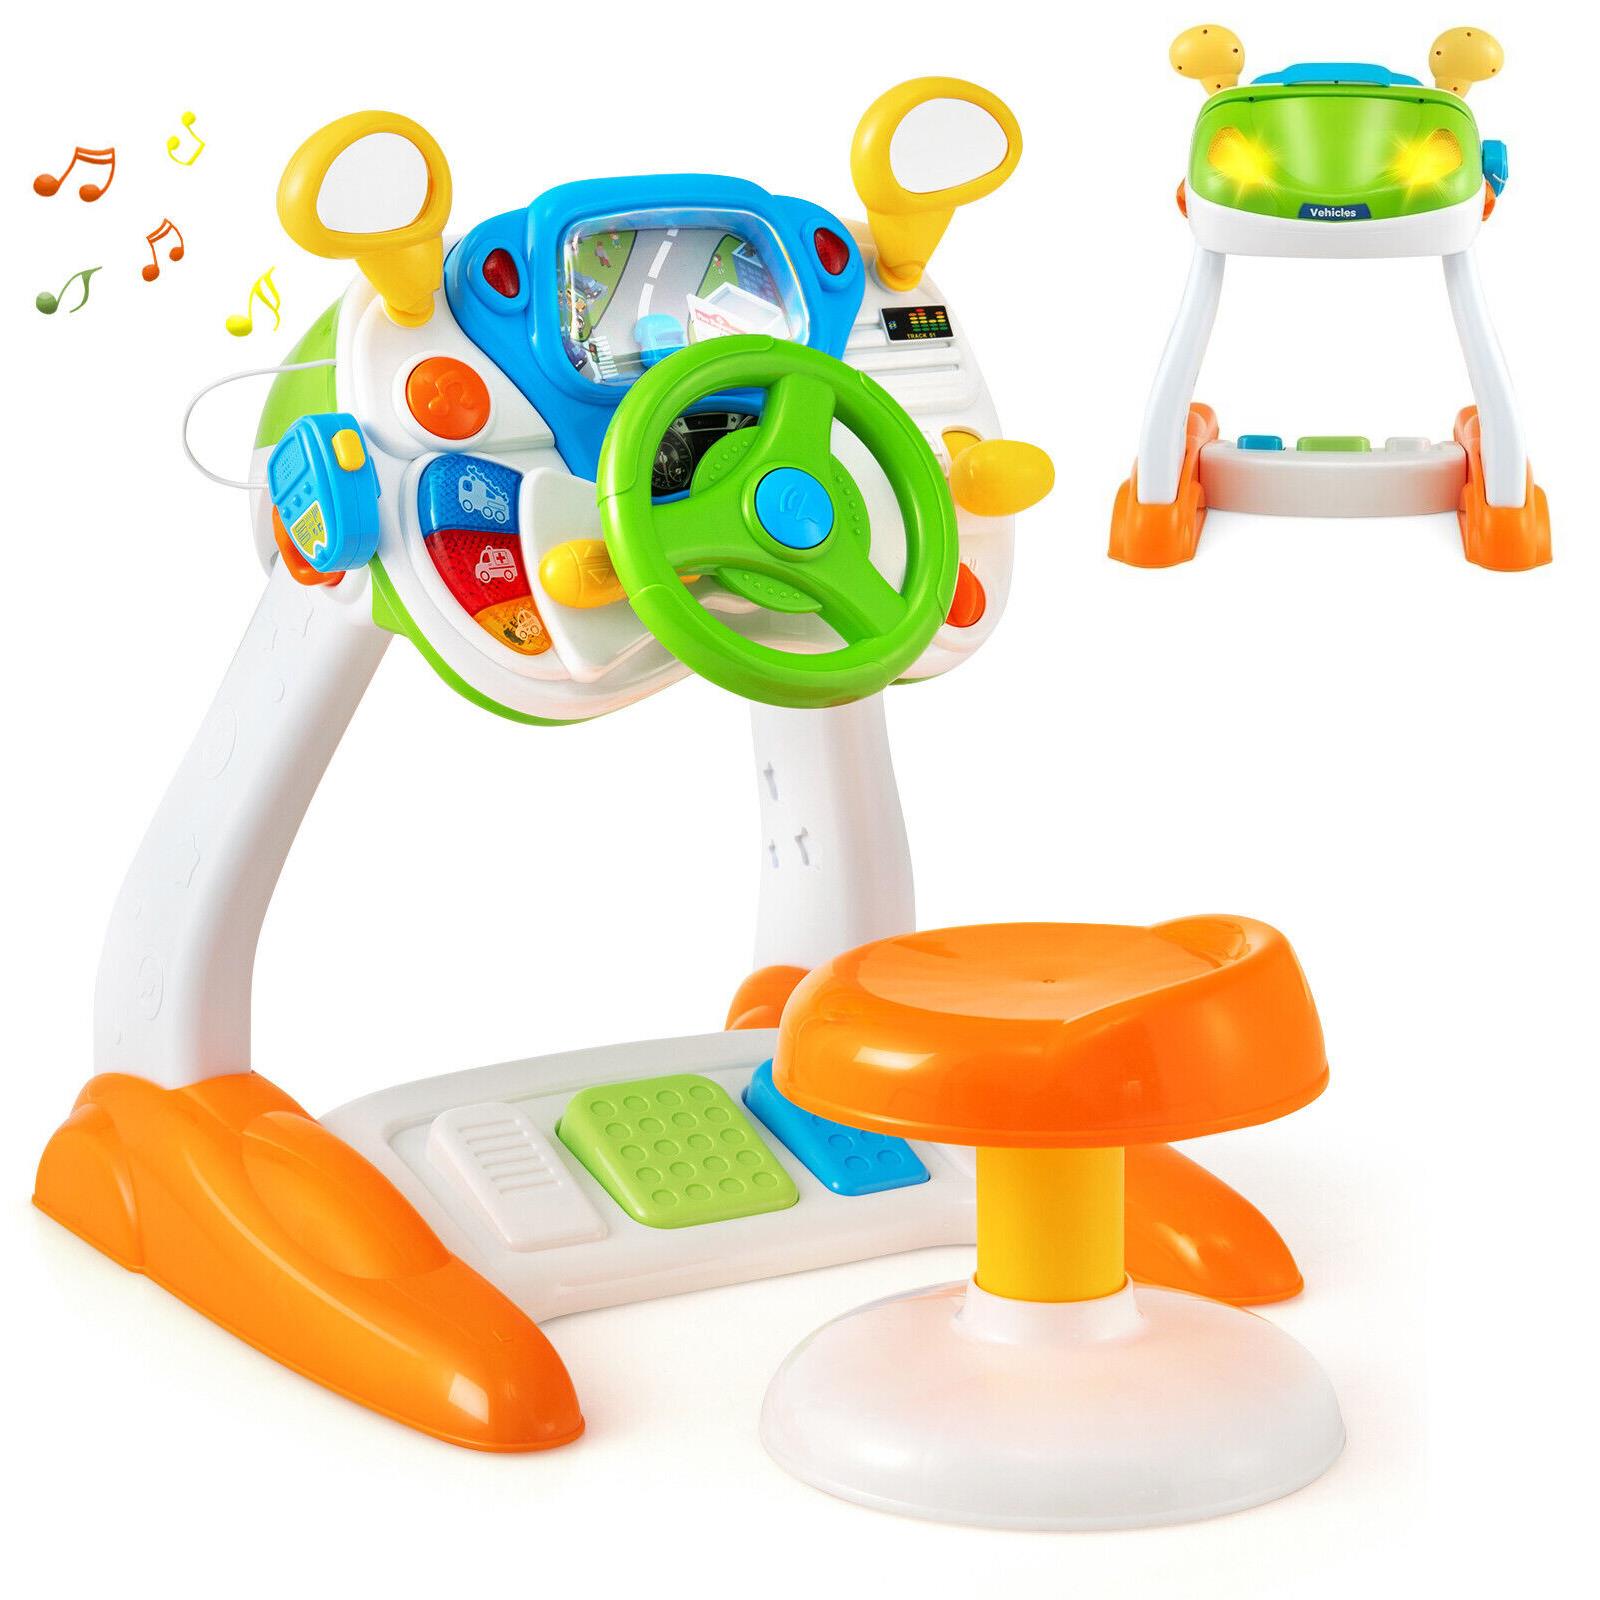 The Magic Toy Shop Kids Simulated Toy Freestanding Electronic Steering Wheel Driving Simulator Toy